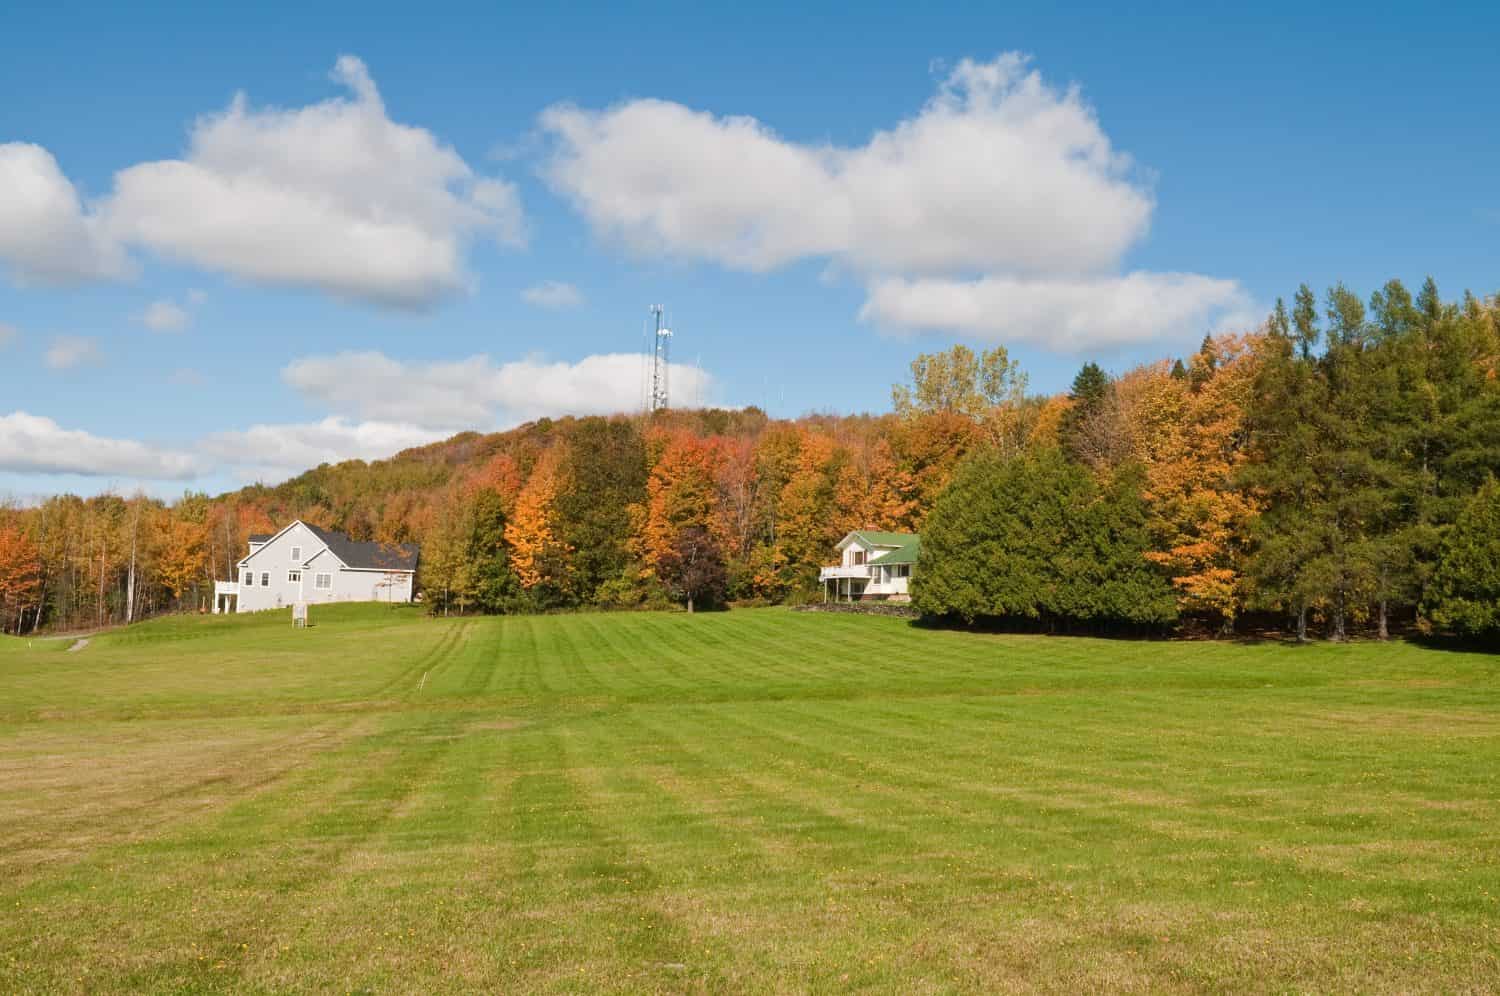 Field and woods in autumn, St. Albans, Vermont